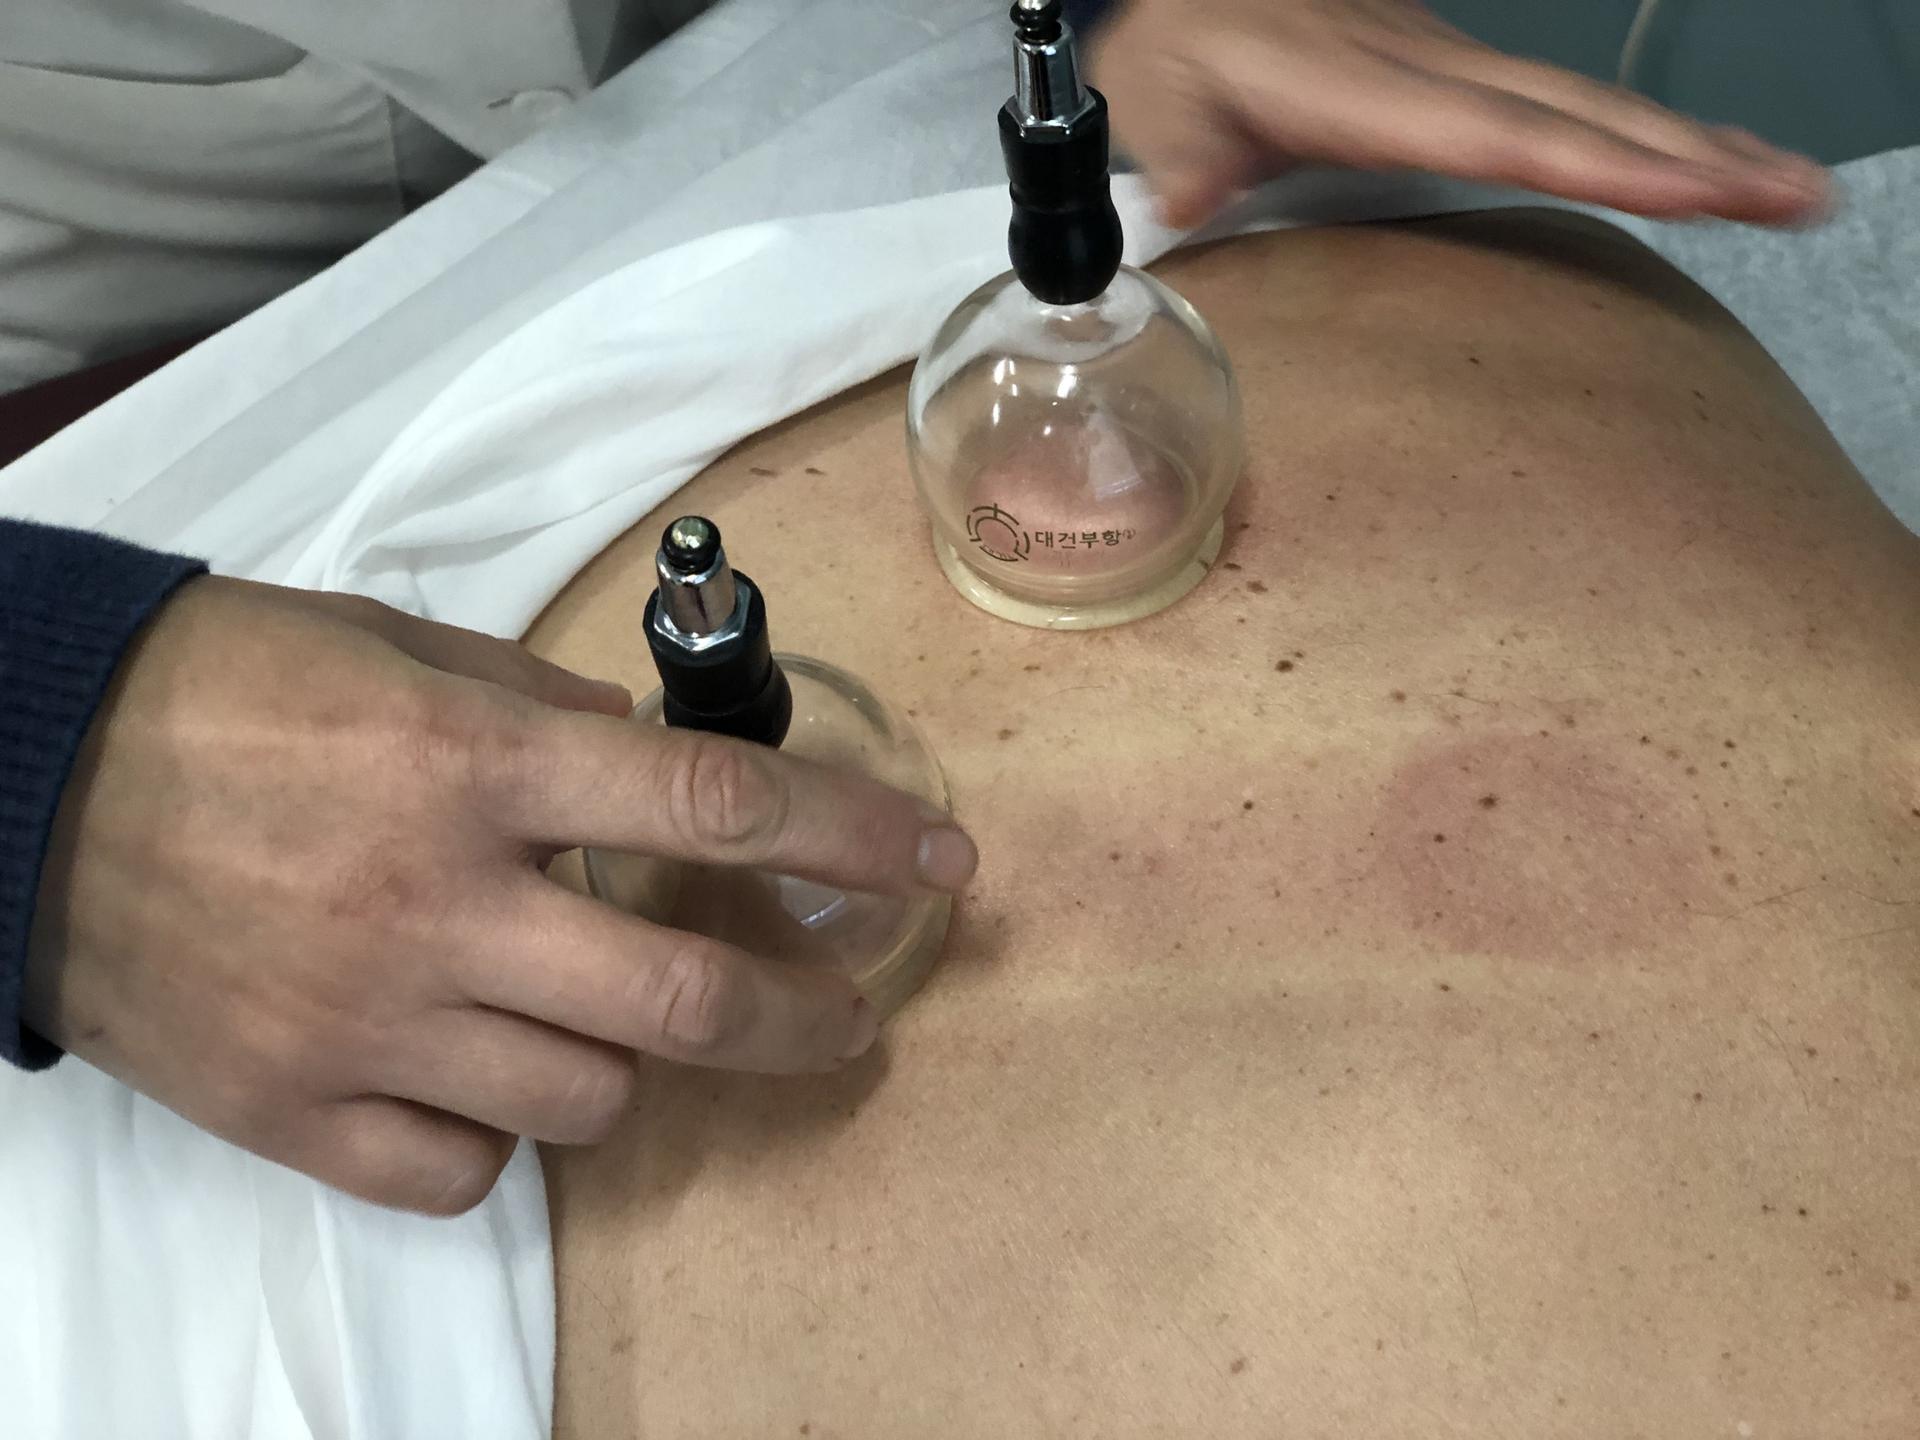 Quan Zhou, a traditional Chinese medicine practitioner, performs a cupping procedure on a patient's back at the New England School of Acupunctu